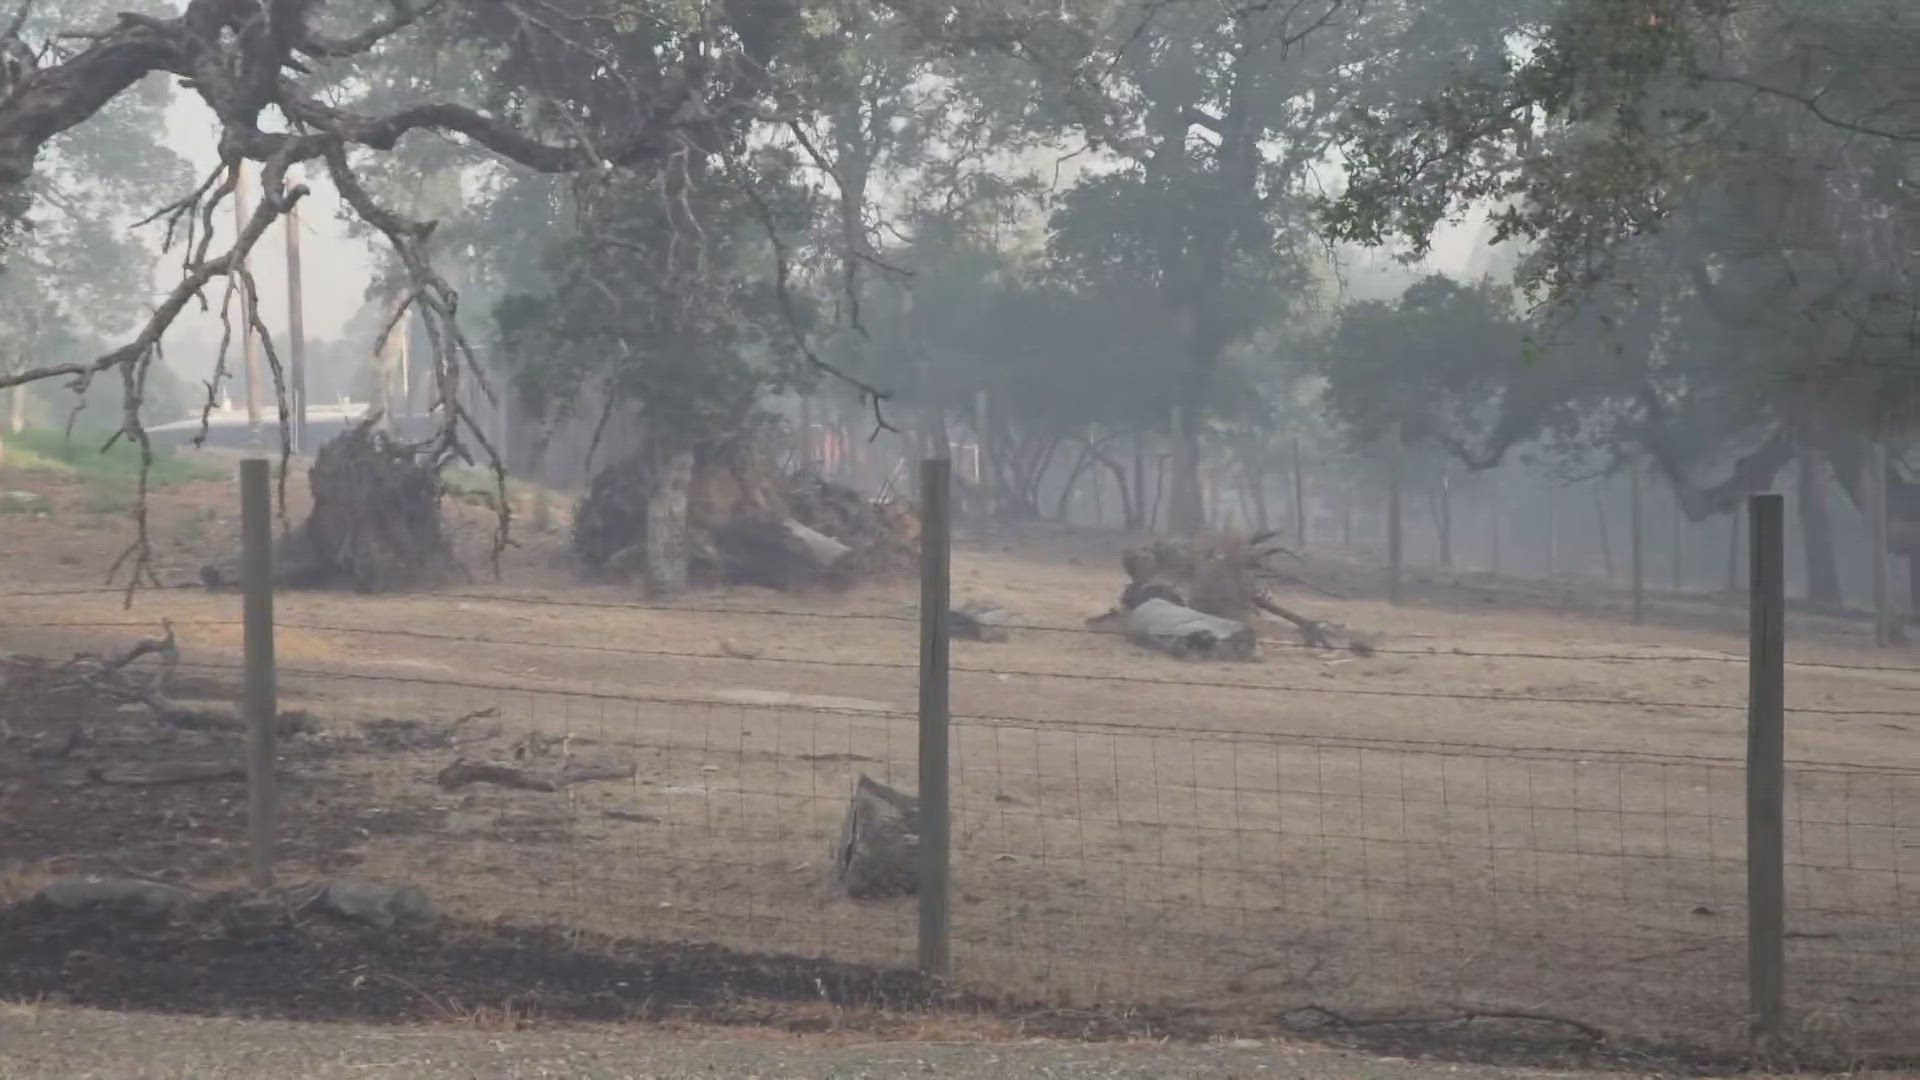 Evacuations are in effect as the Apache Fire burns in Butte County on Tuesday.